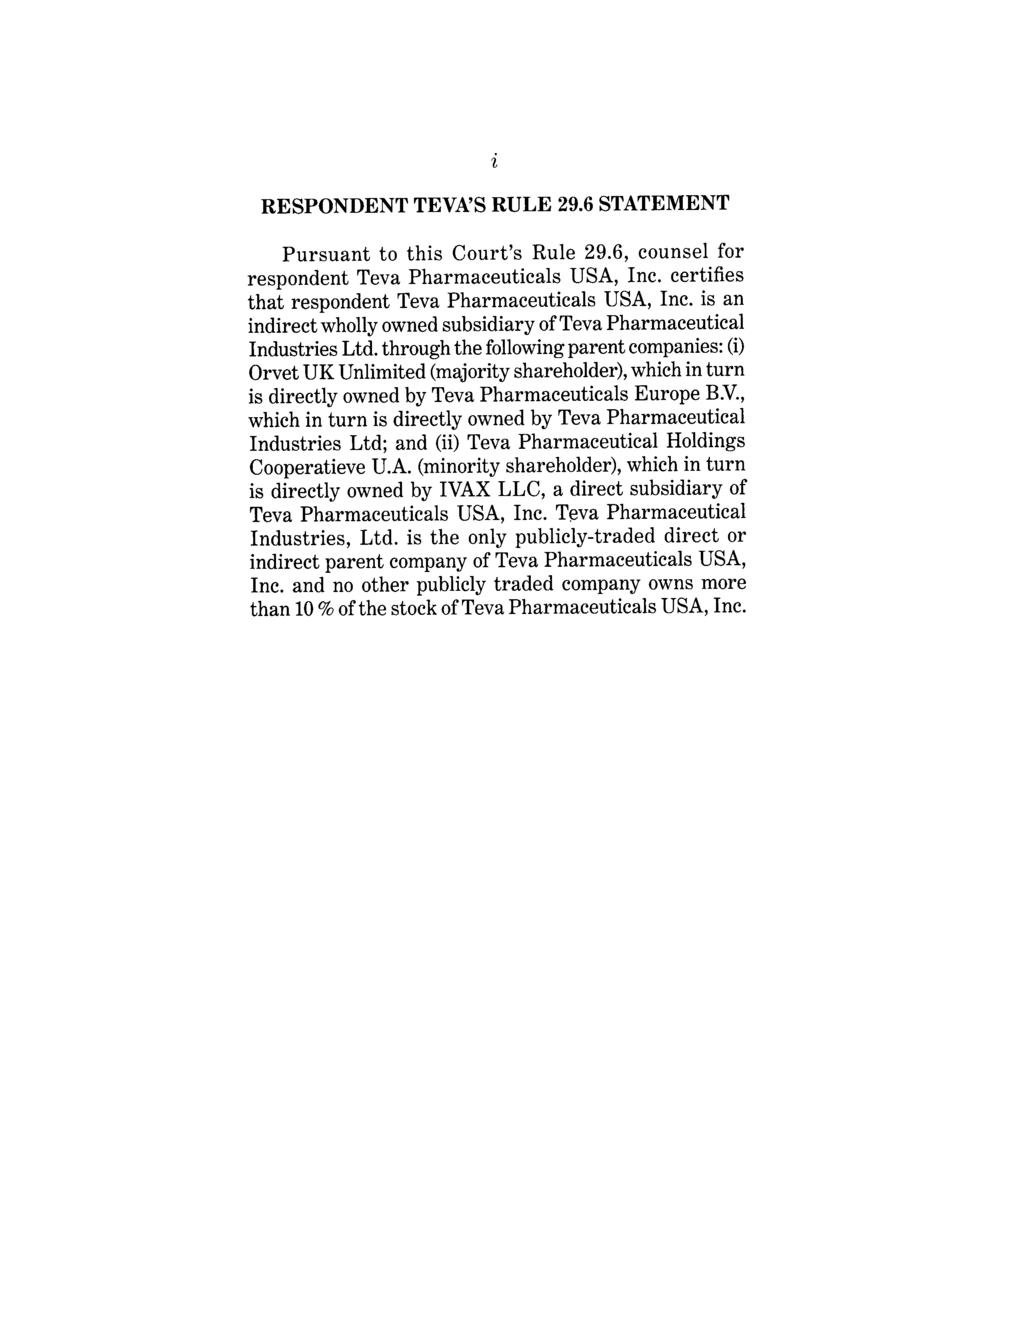 RESPONDENT TEVA S RULE 29.6 STATEMENT Pursuant to this Court s Rule 29.6, counsel for respondent Teva Pharmaceuticals USA, Inc. certifies that respondent Teva Pharmaceuticals USA, Inc.